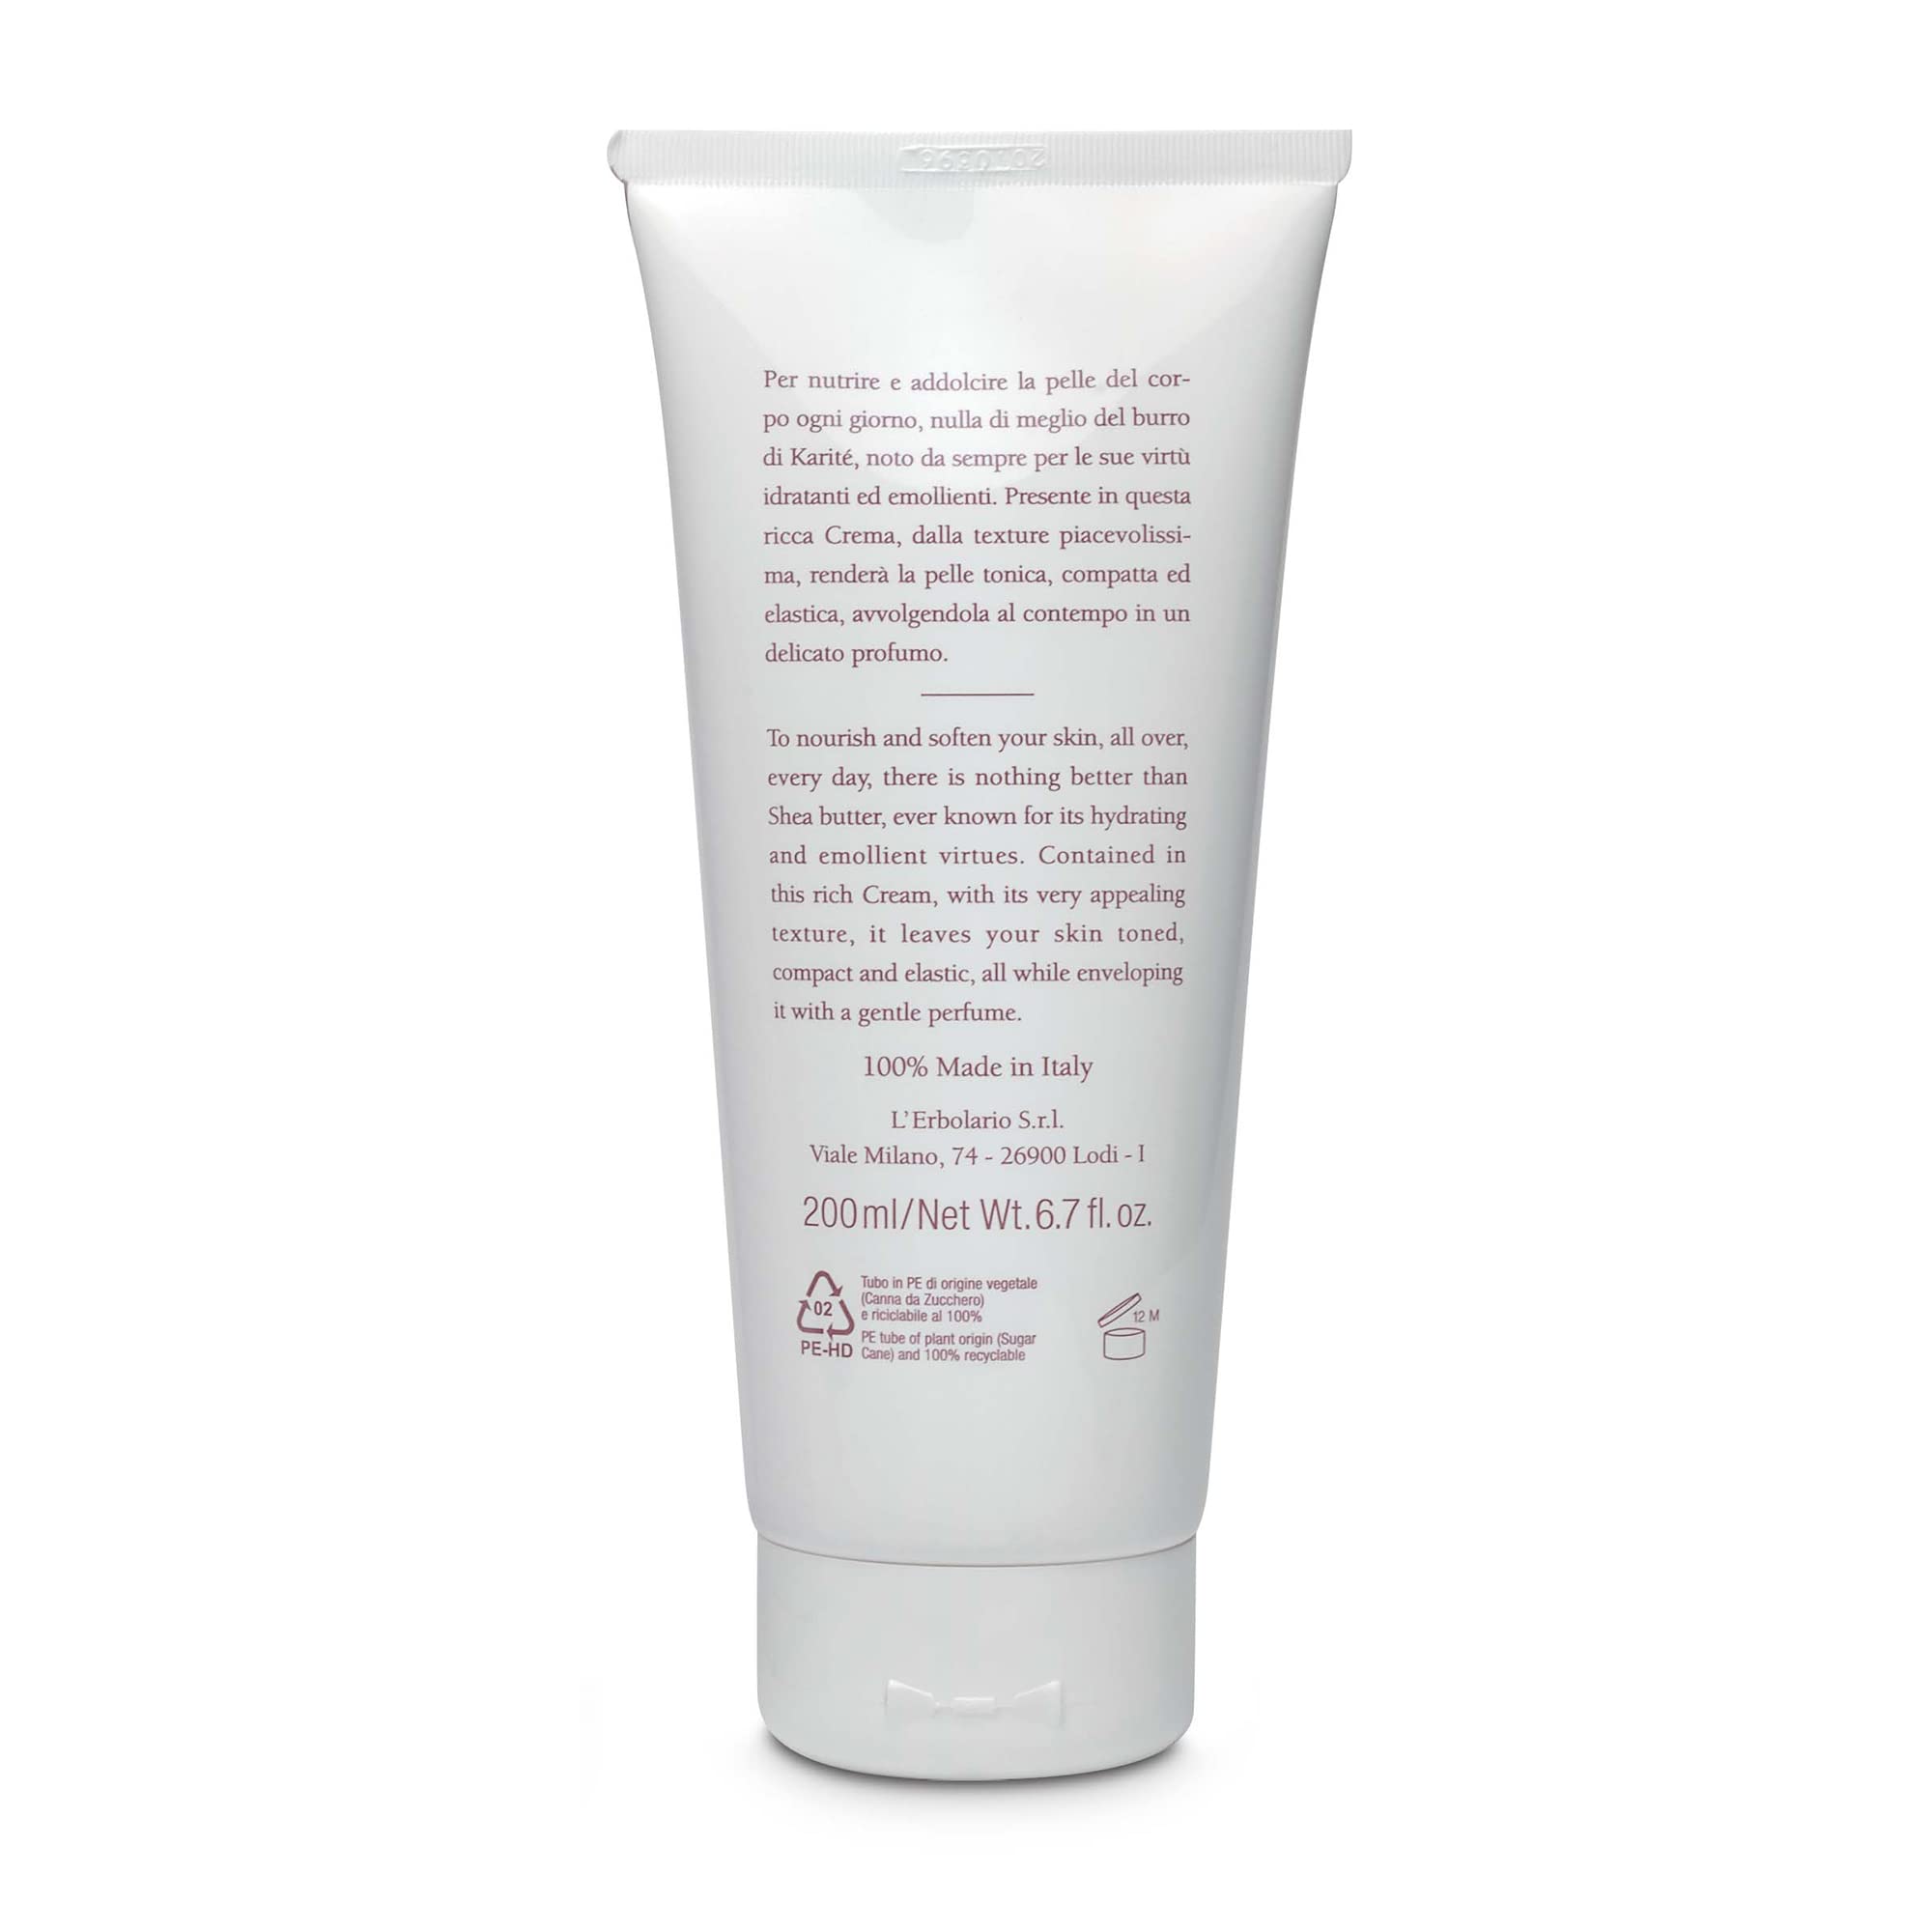 L'Erbolario Shea Butter Nourishing Hand Cream - Incredibly Revitalizing And Emollient Properties - Softens And Hydrates - Strengthens The Skin’s Barrier - Protects From External Aggressors - 6.7 Oz